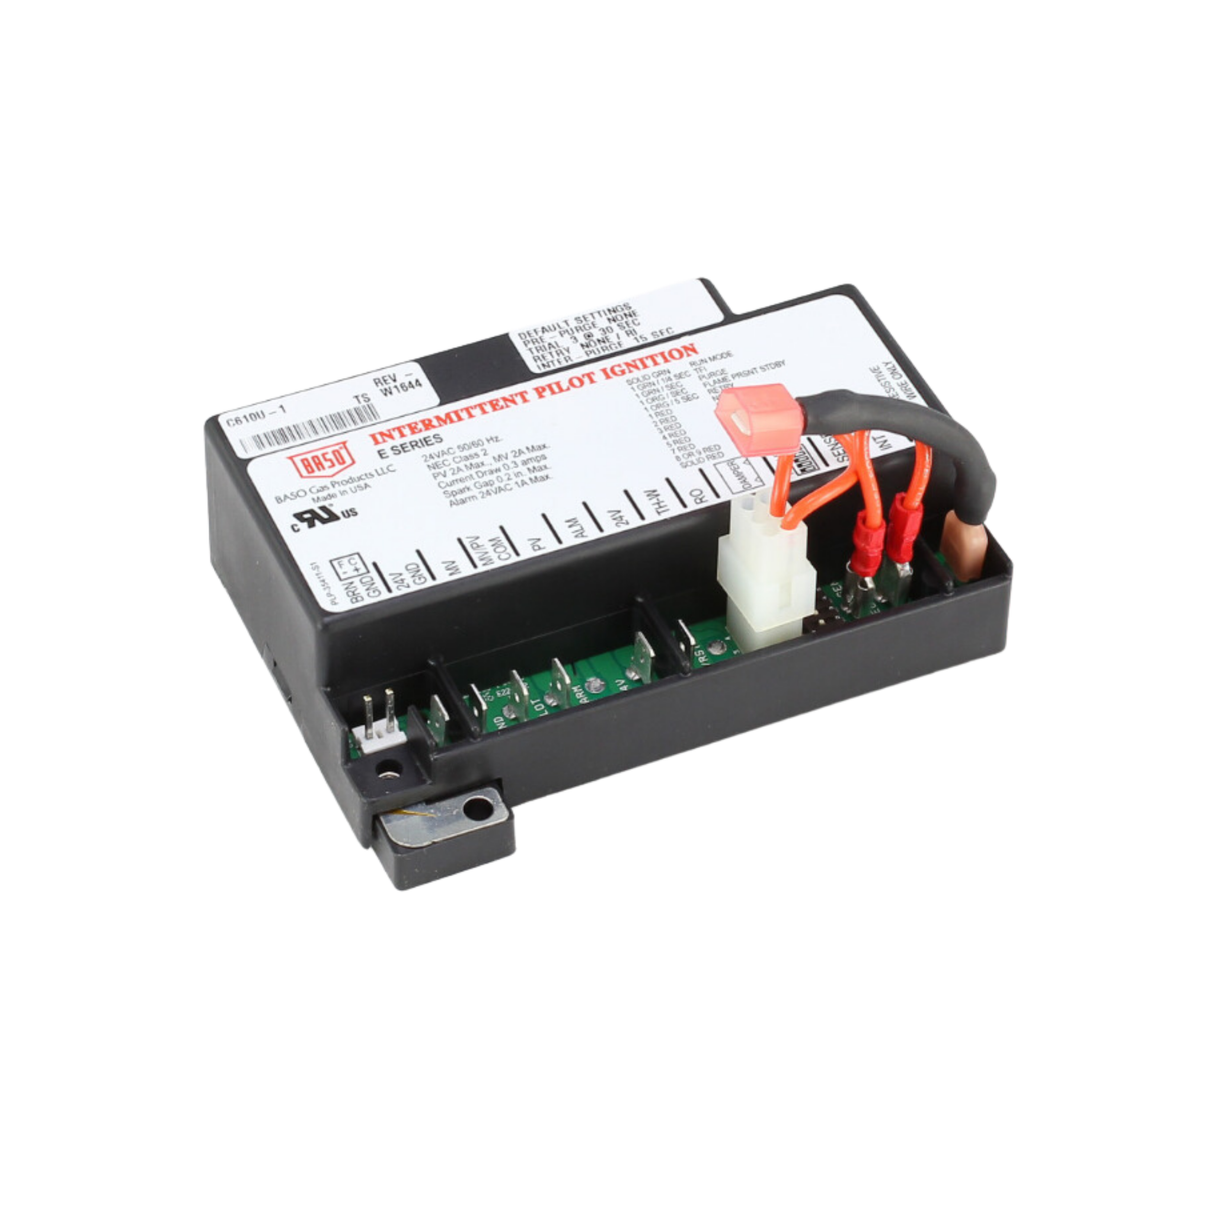 Baso C610U-1C Universal Intermittent, Pilot Ignition Control Board with or without Automatic Vent Damper